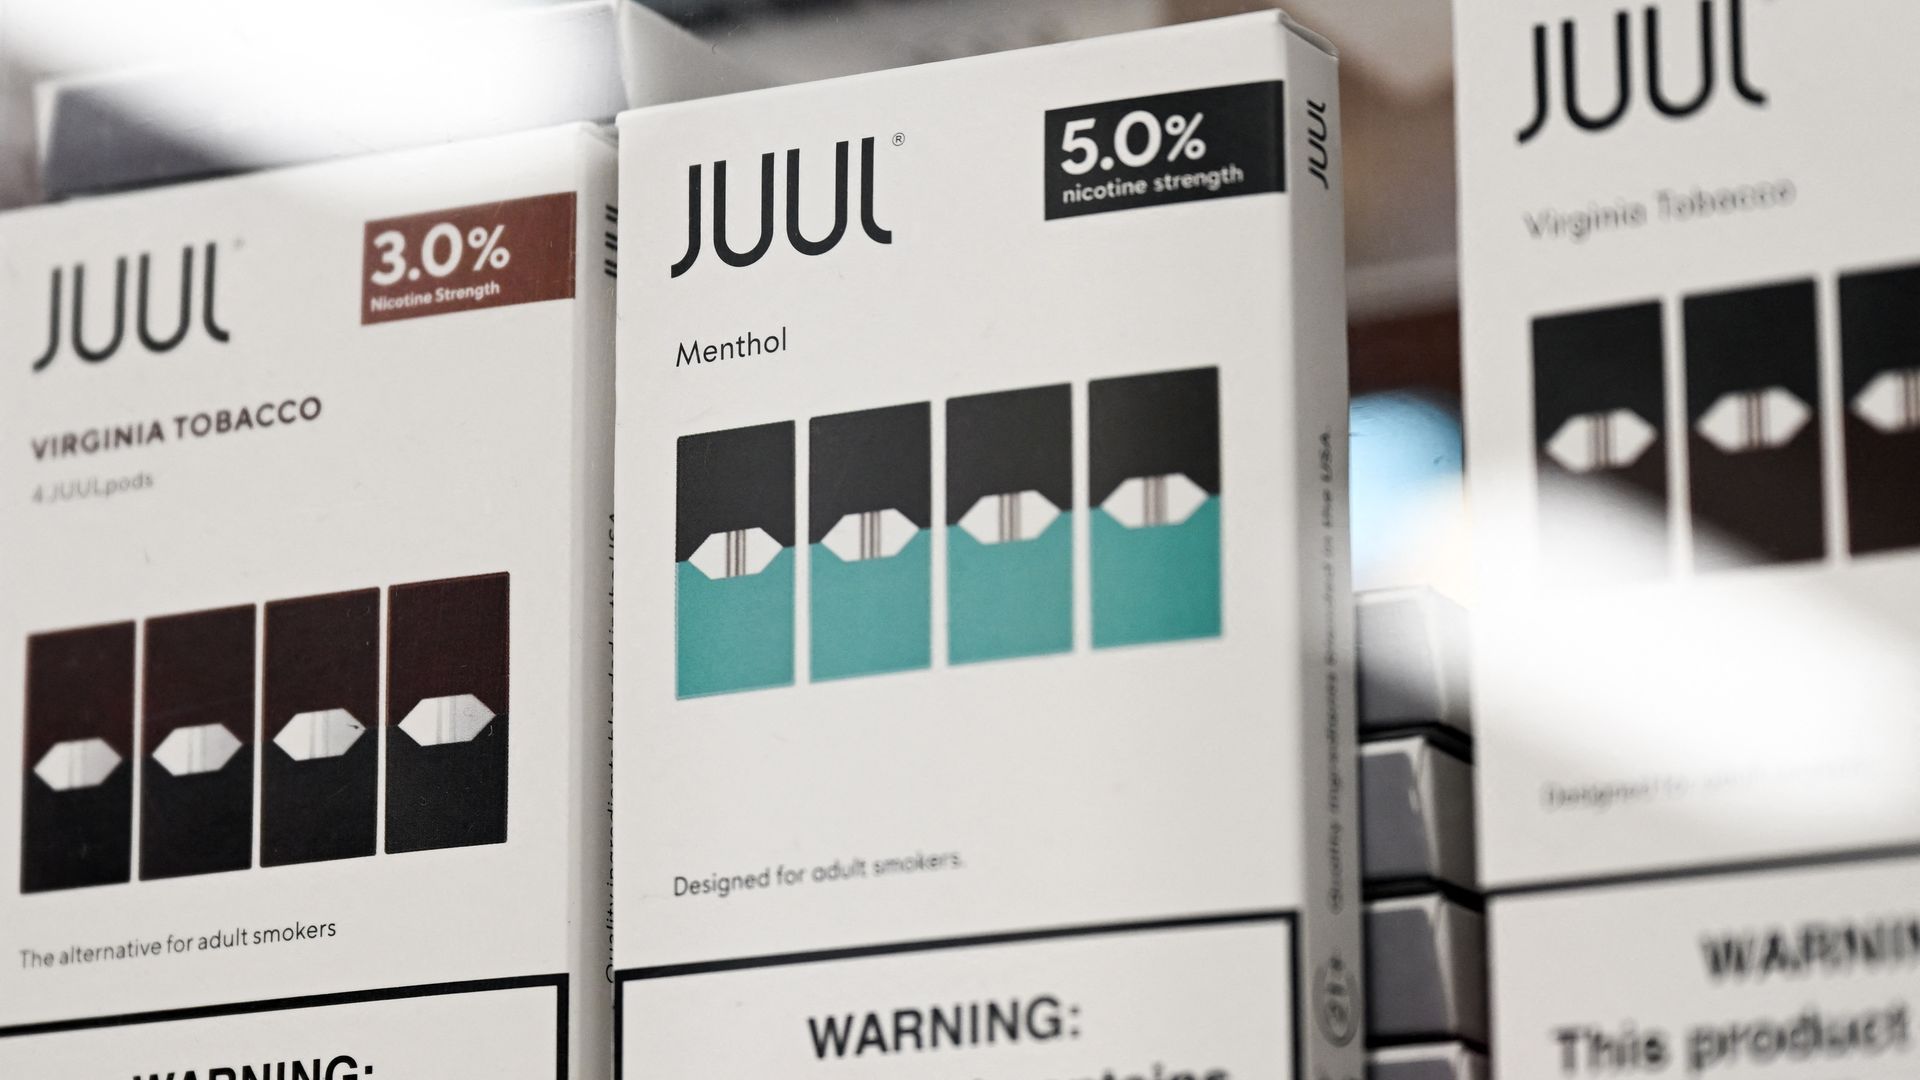 JUUL Labs Inc. Virginia tobacco and menthol flavored vaping e-cigarette products are displayed in a convenience store on June 23, 2022 in El Segundo, California.